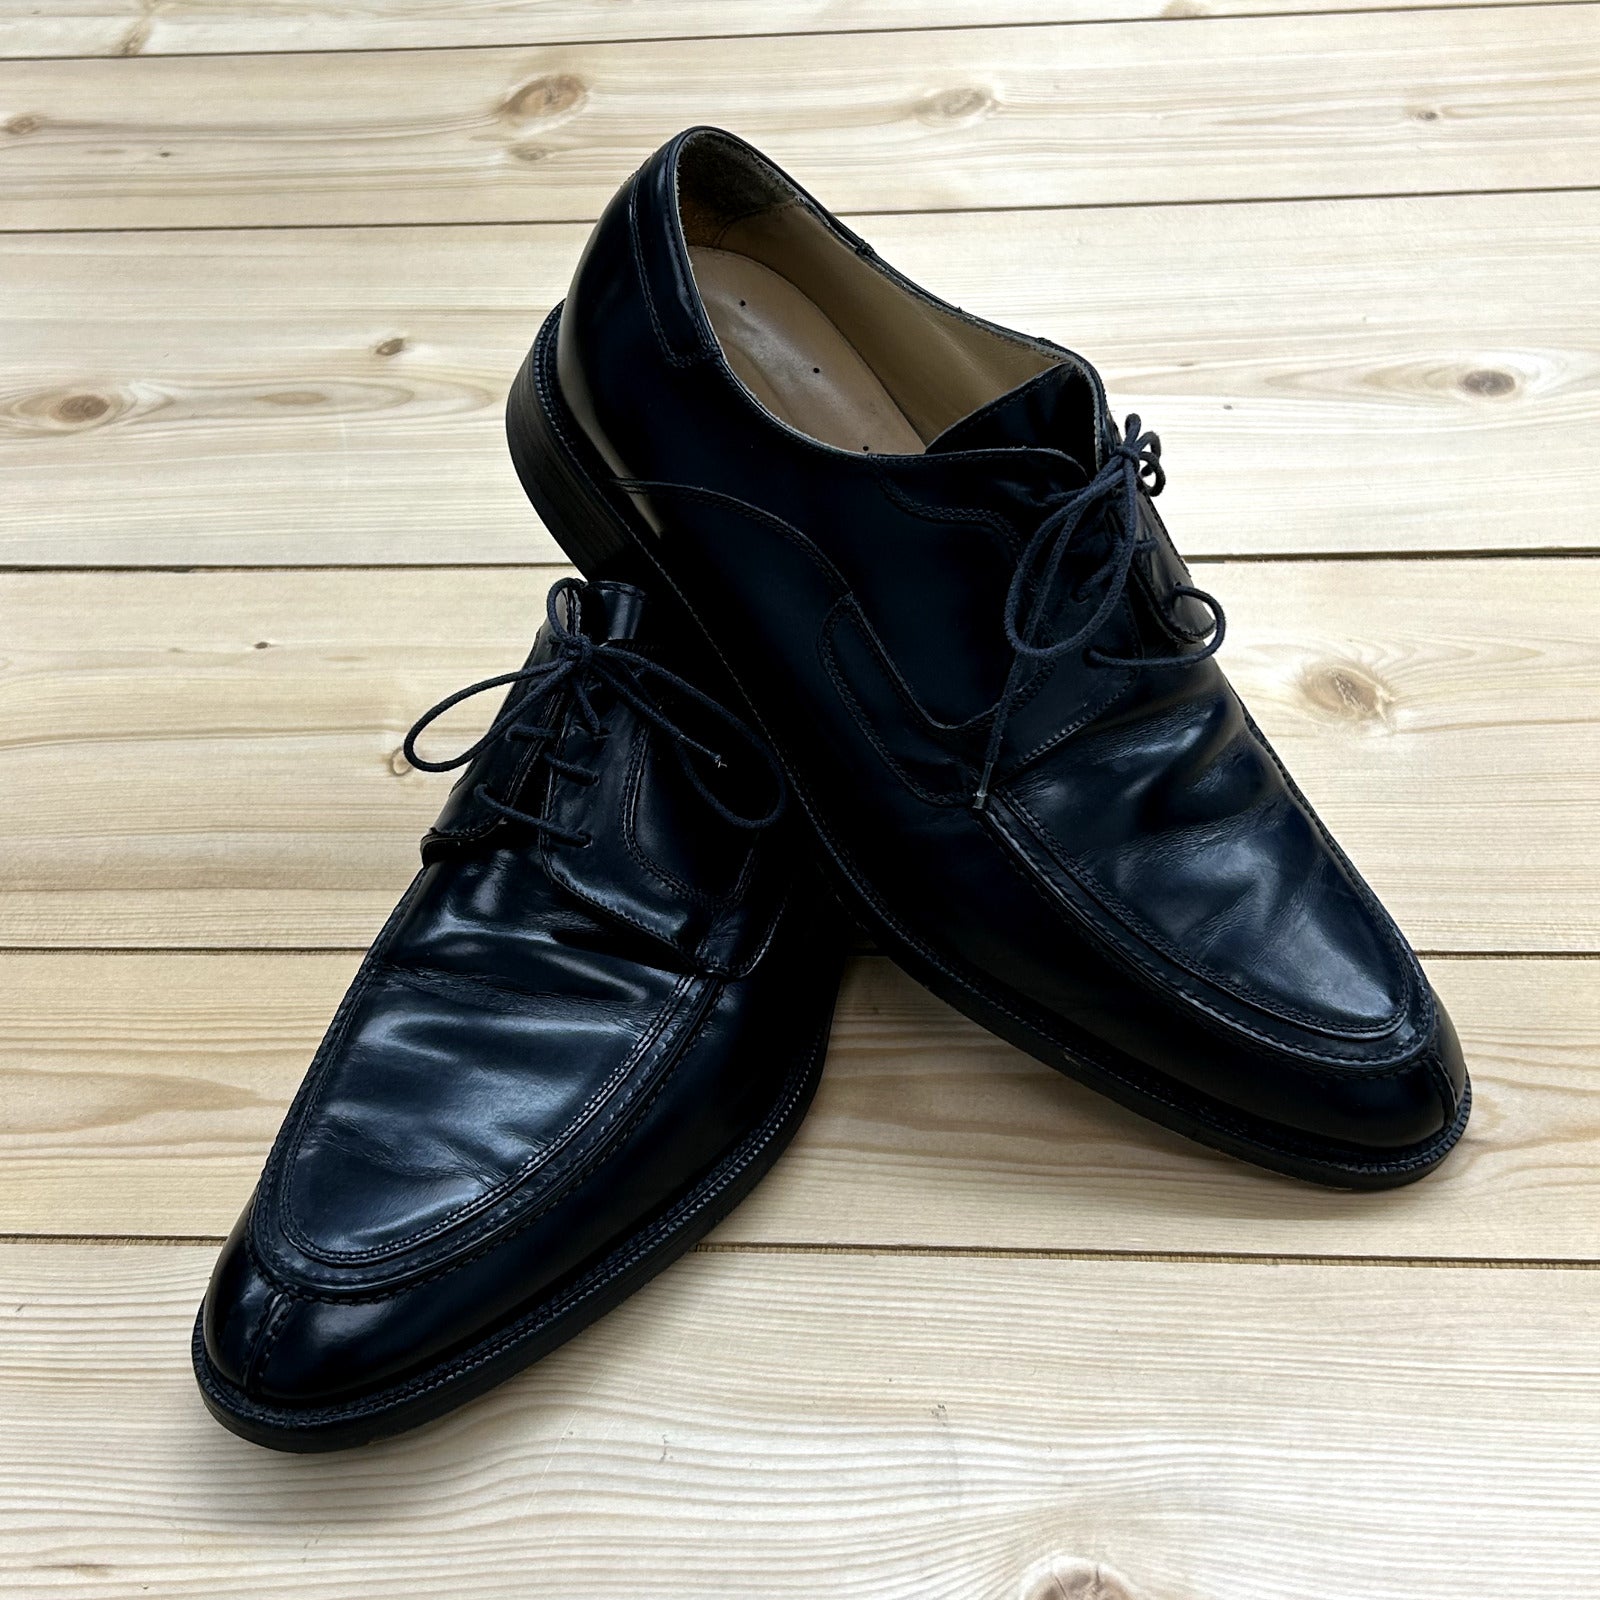 Johnston & Murphy Signature Series Black Derby Dress Shoes Size 11 Made in Italy